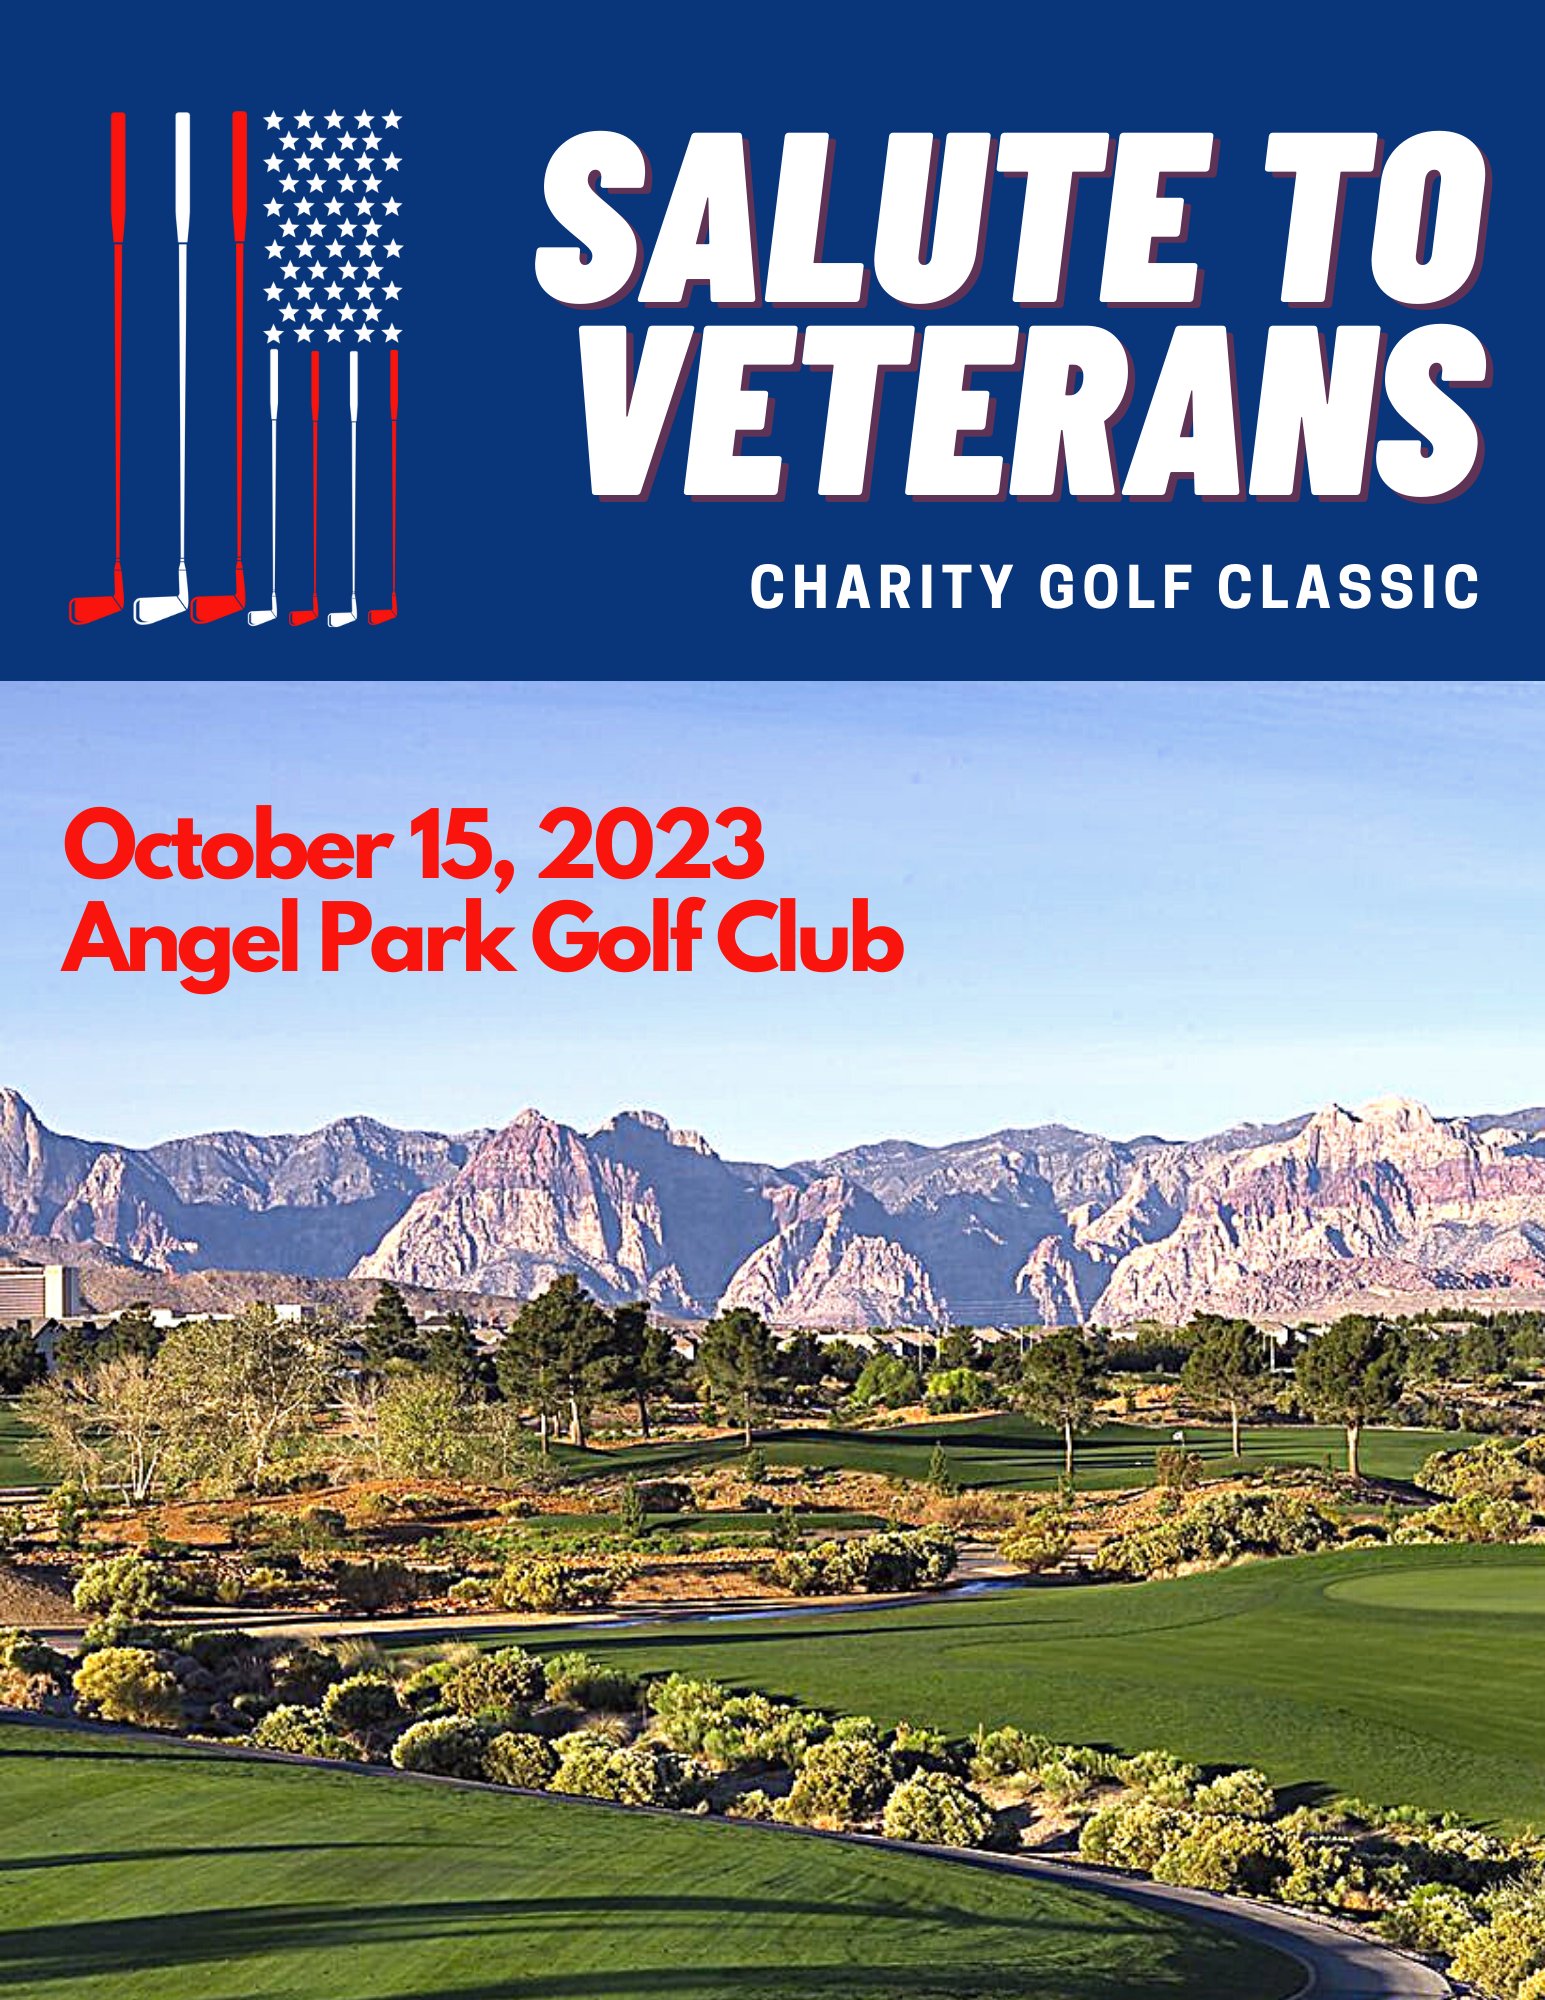 Salute to Veterans Charity Golf Classic flyer